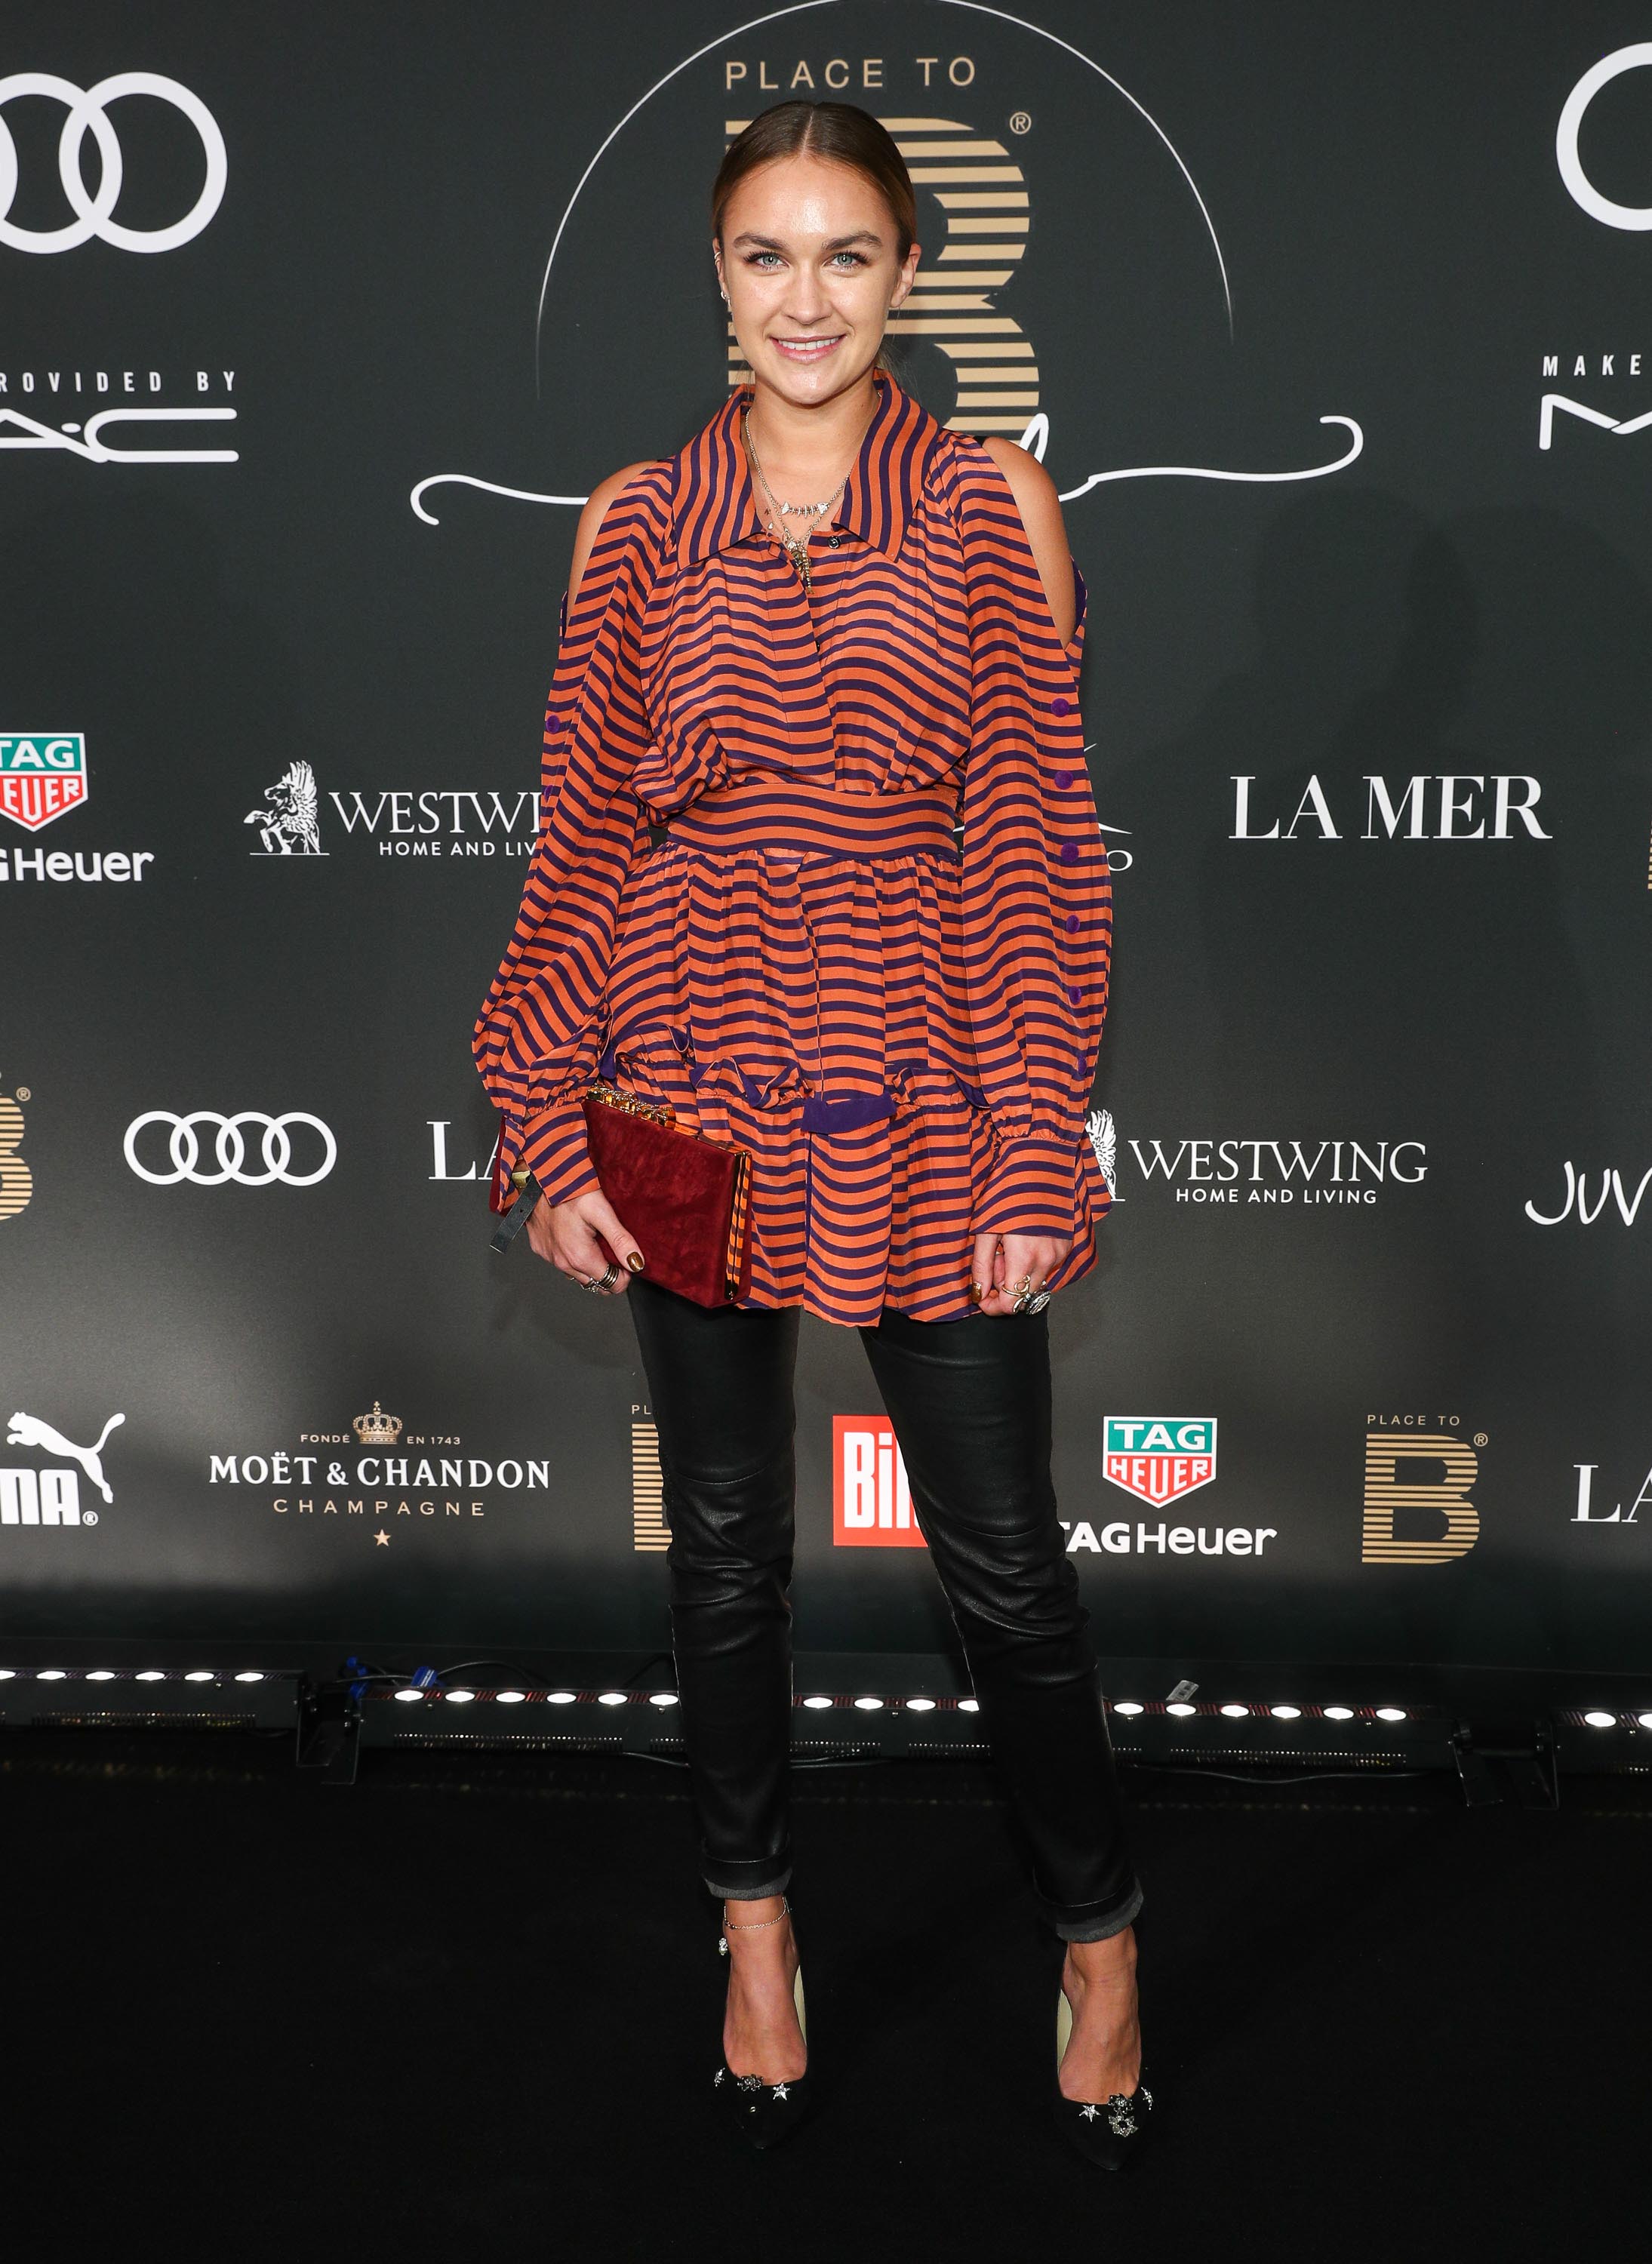 Nina Suess attends the Place To B Influencer Award